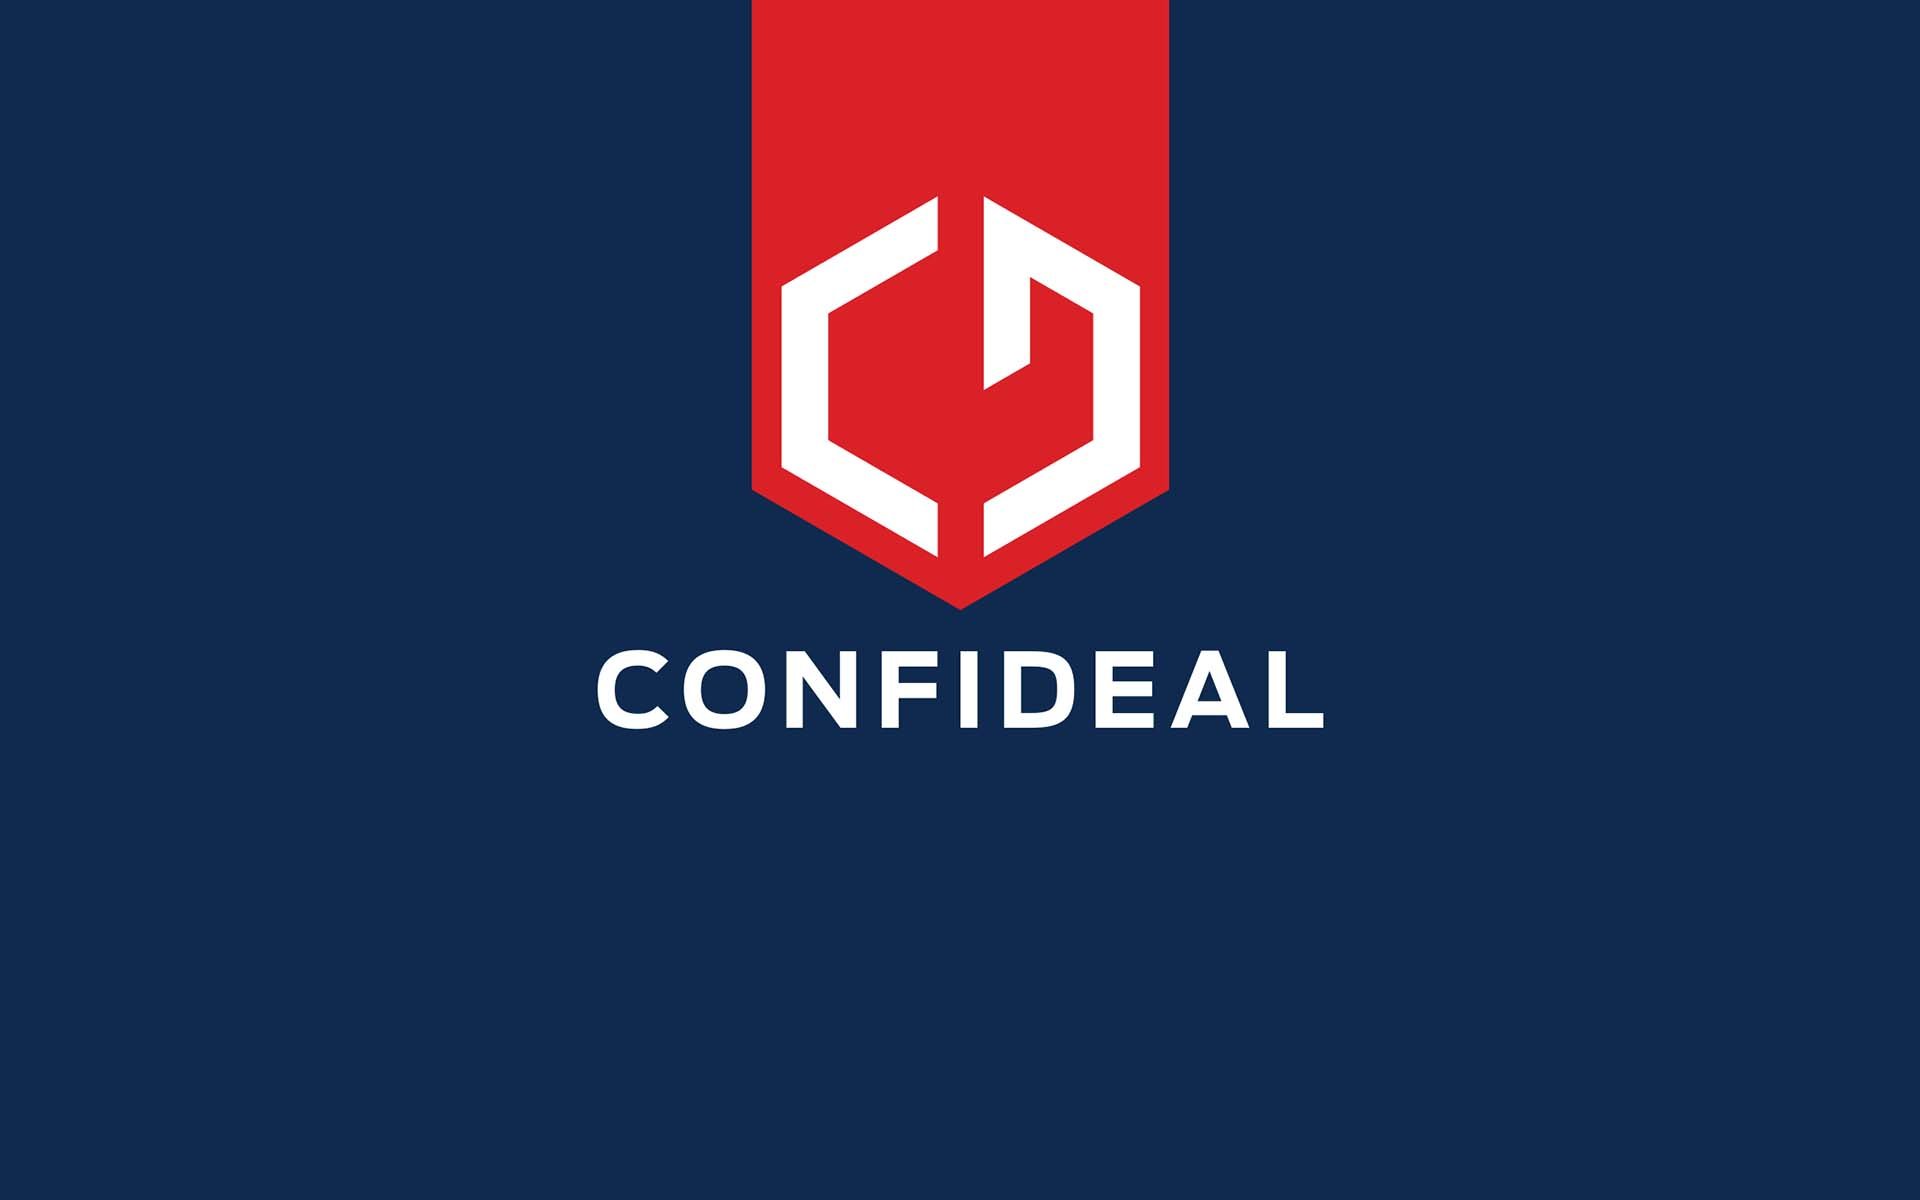 Built-in Arbitration System is the Hallmark of Confideal